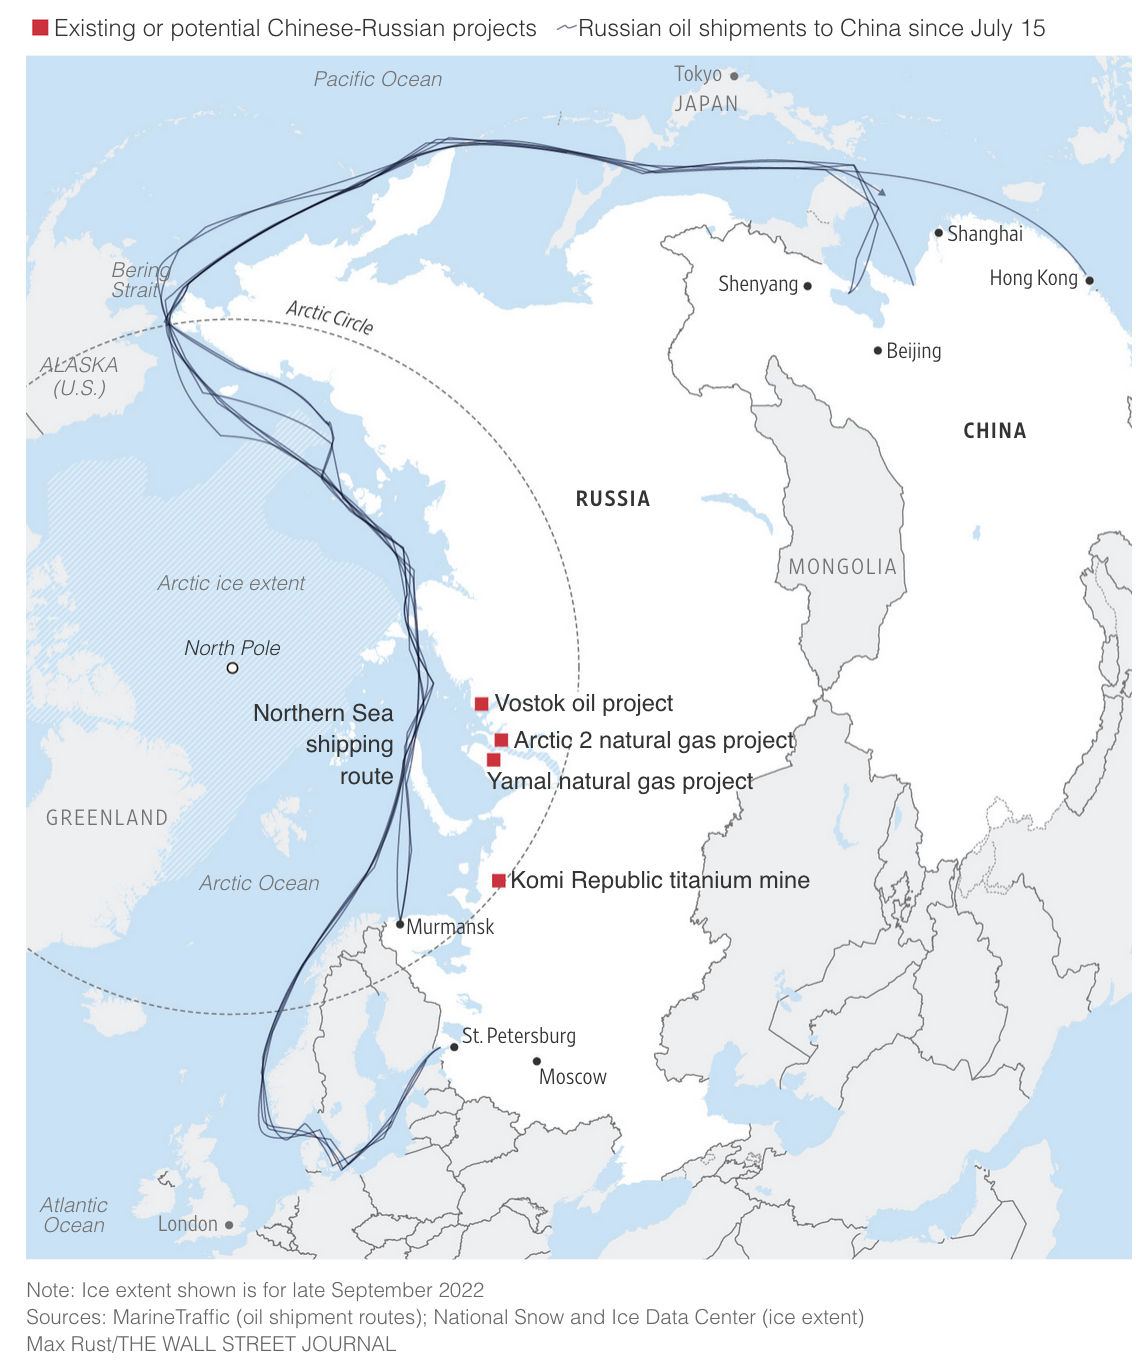 Cold War Games: U.S. Is Unprepared To Test The Waters In Icy Arctic (#GotBitcoin)